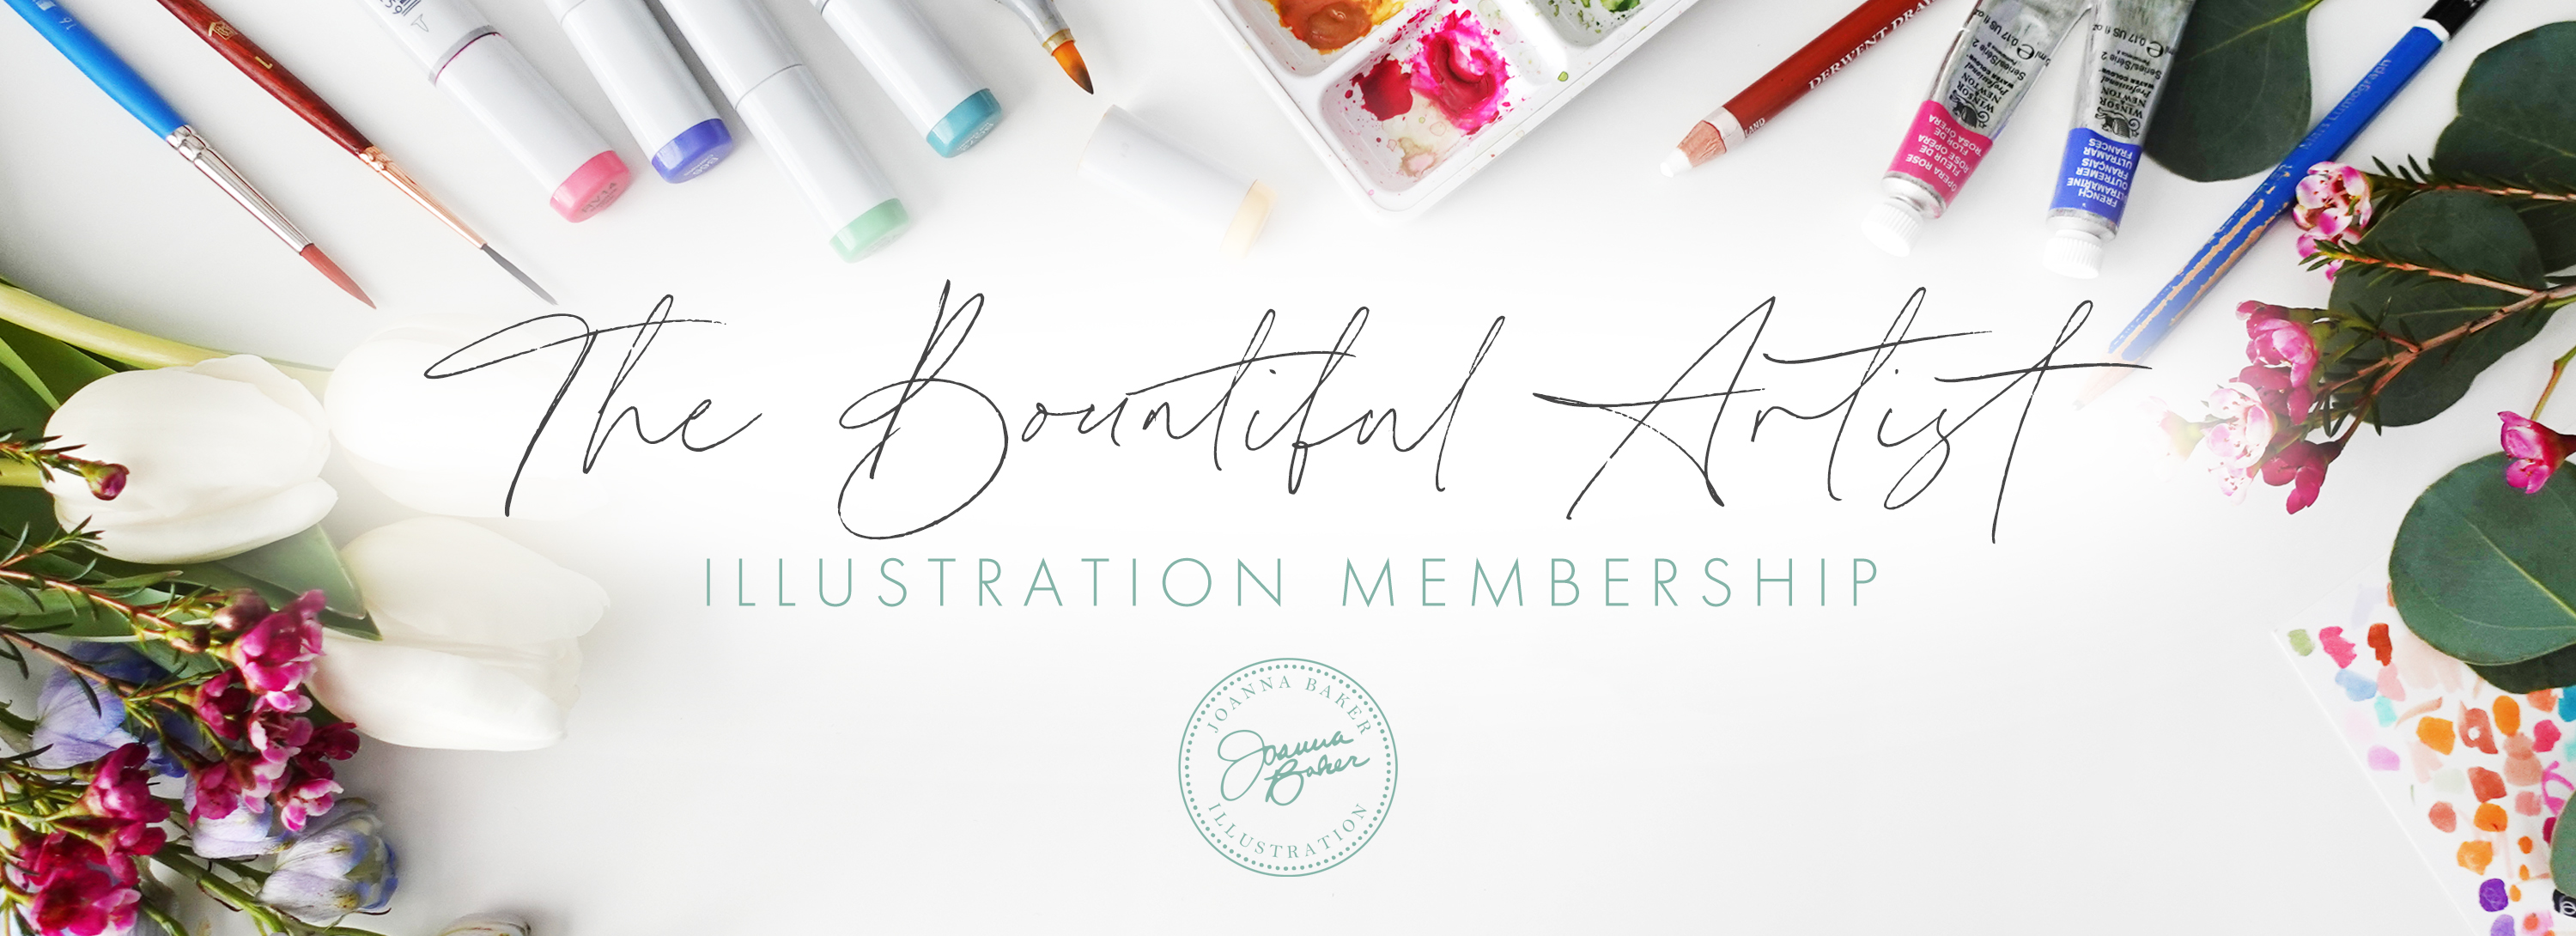 The Bountiful Artist Monthly Membership by Joanna Baker